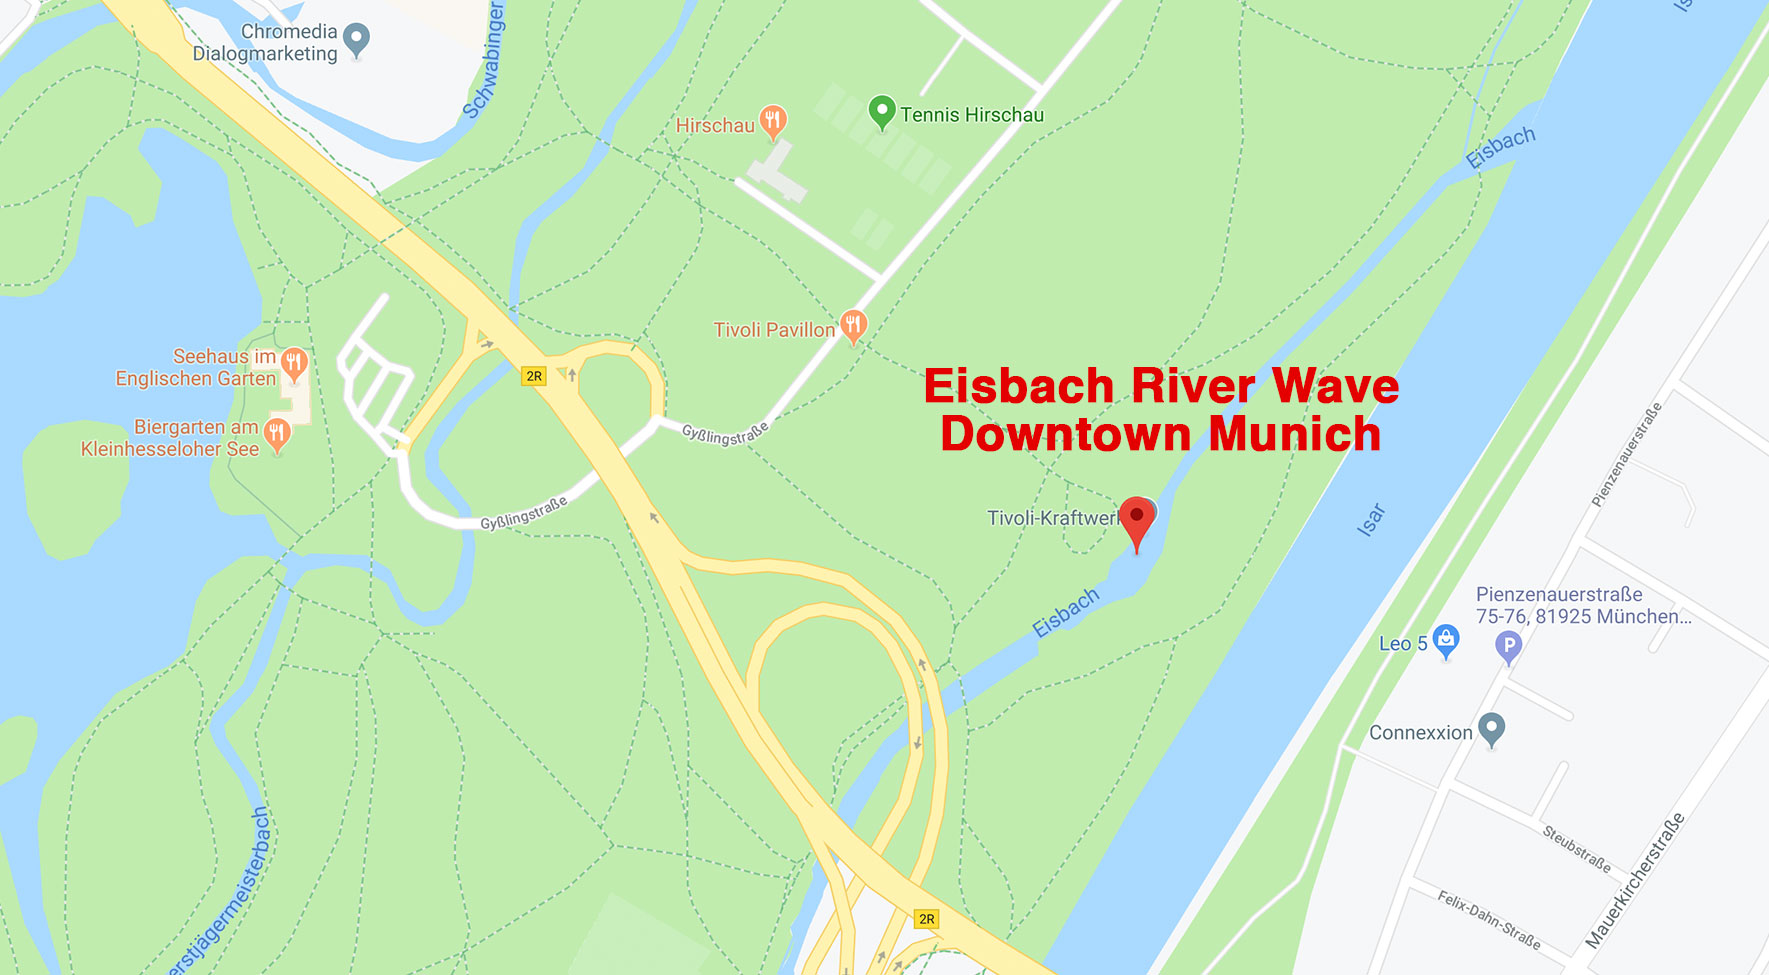 Surfing the Eisbach River Wave | Downtown Munich, Germany | Dr Steven A Martin | Surf Tourism Research